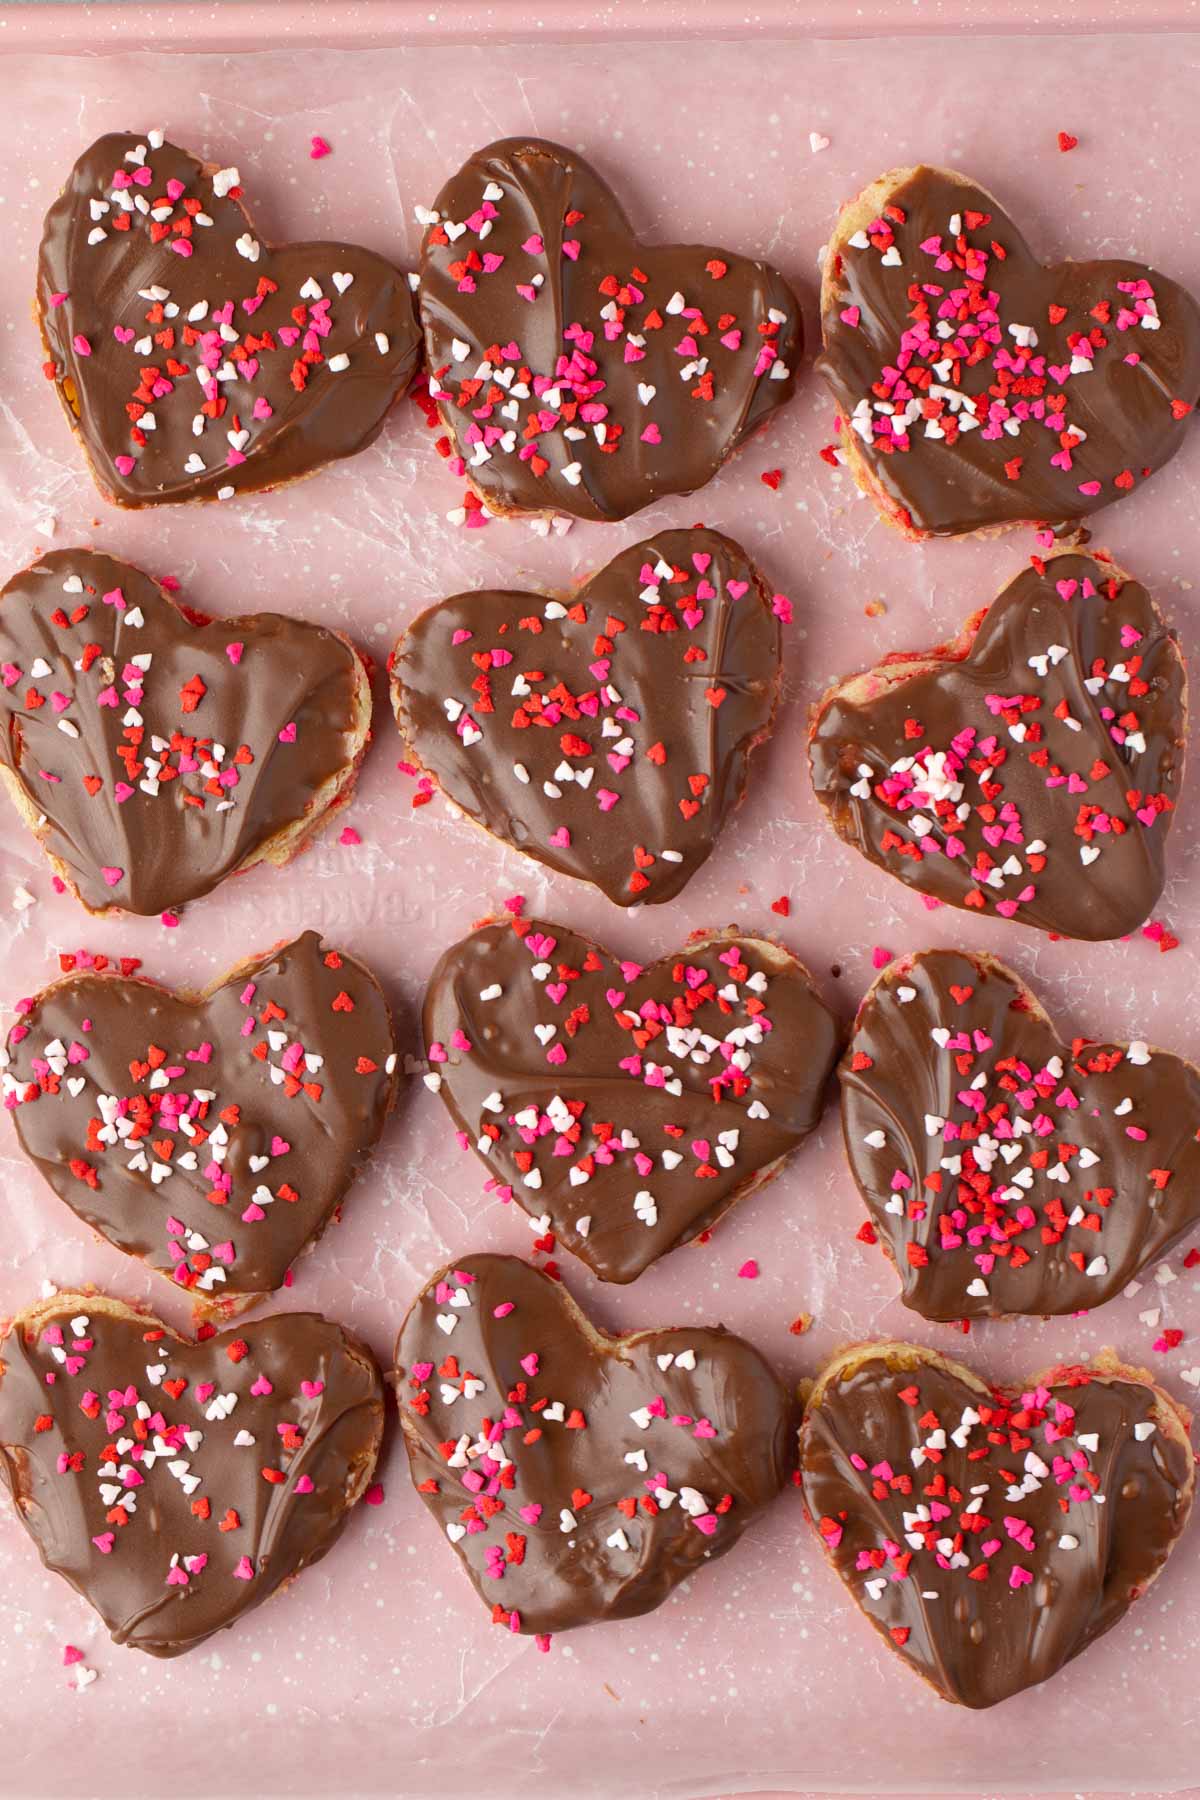 heart shaped sugar cookies with chocolate frosting and red sprinkles on top